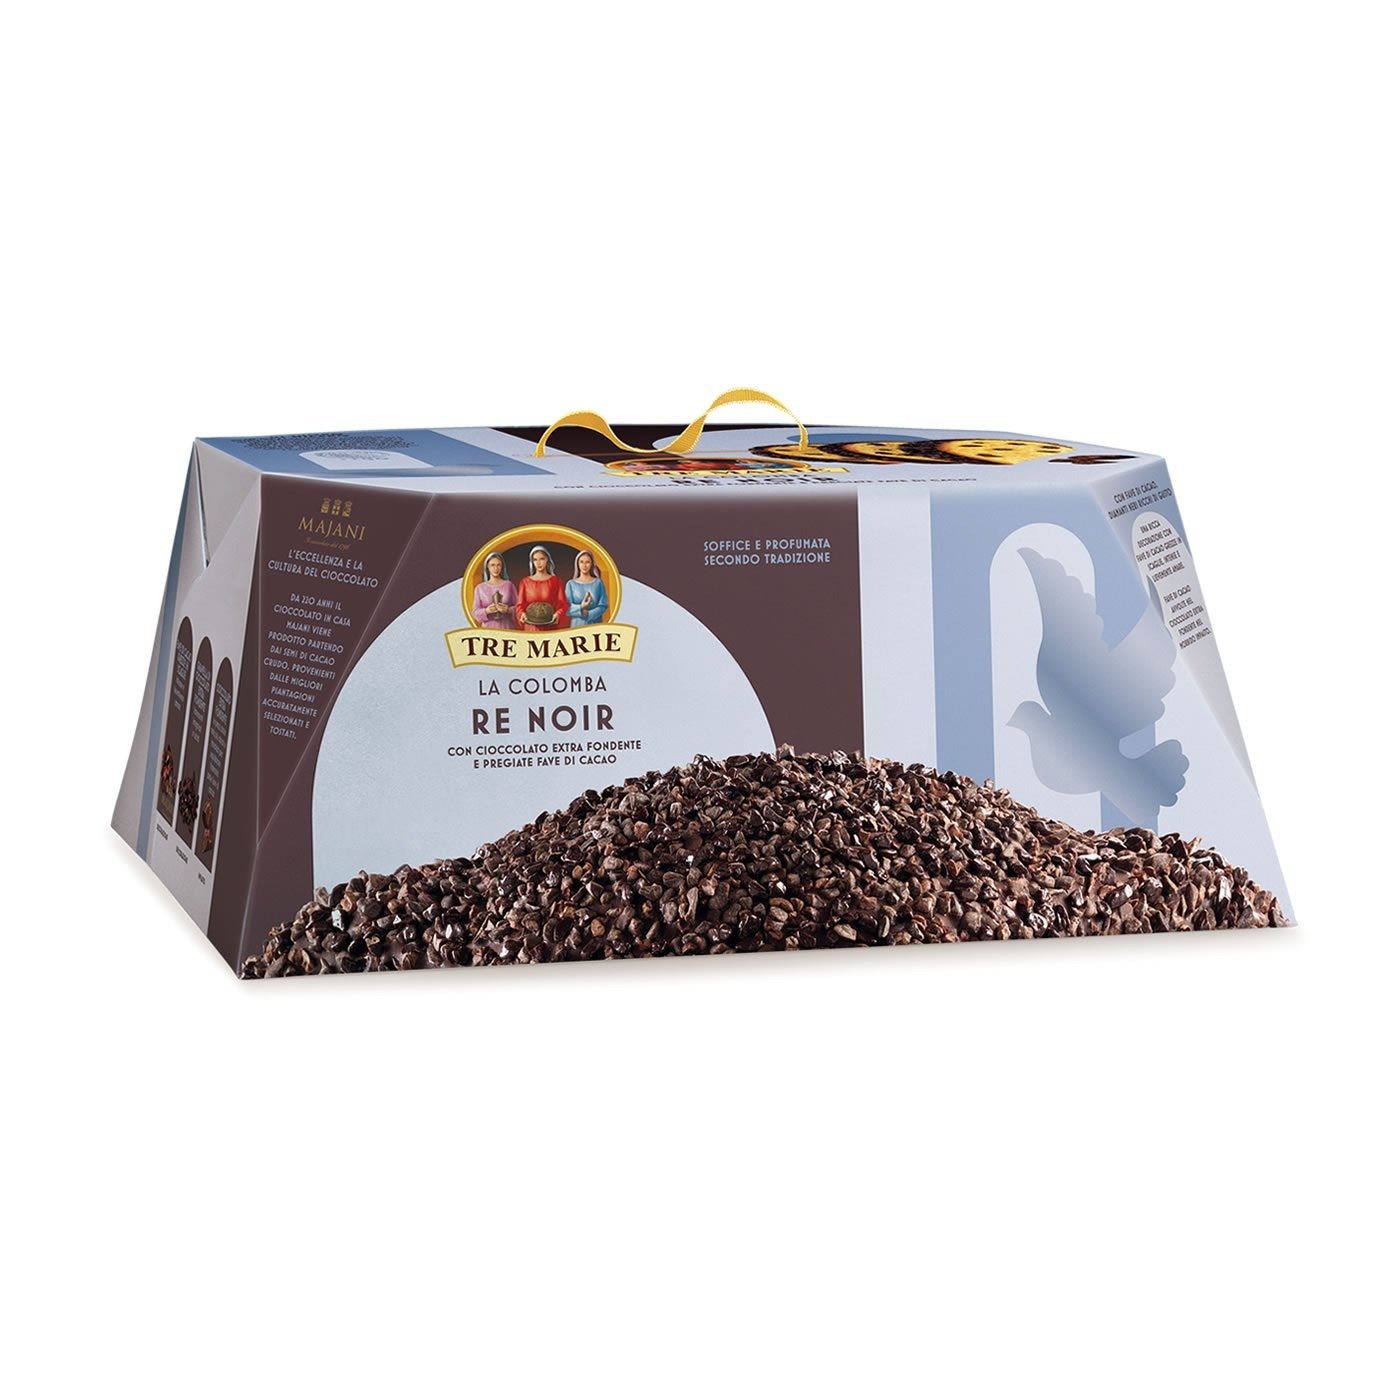 Tre Marie Re Noir, Dark Chocolate & Pieces of Cocoa Beans Colomba, 28.2 oz | 800g